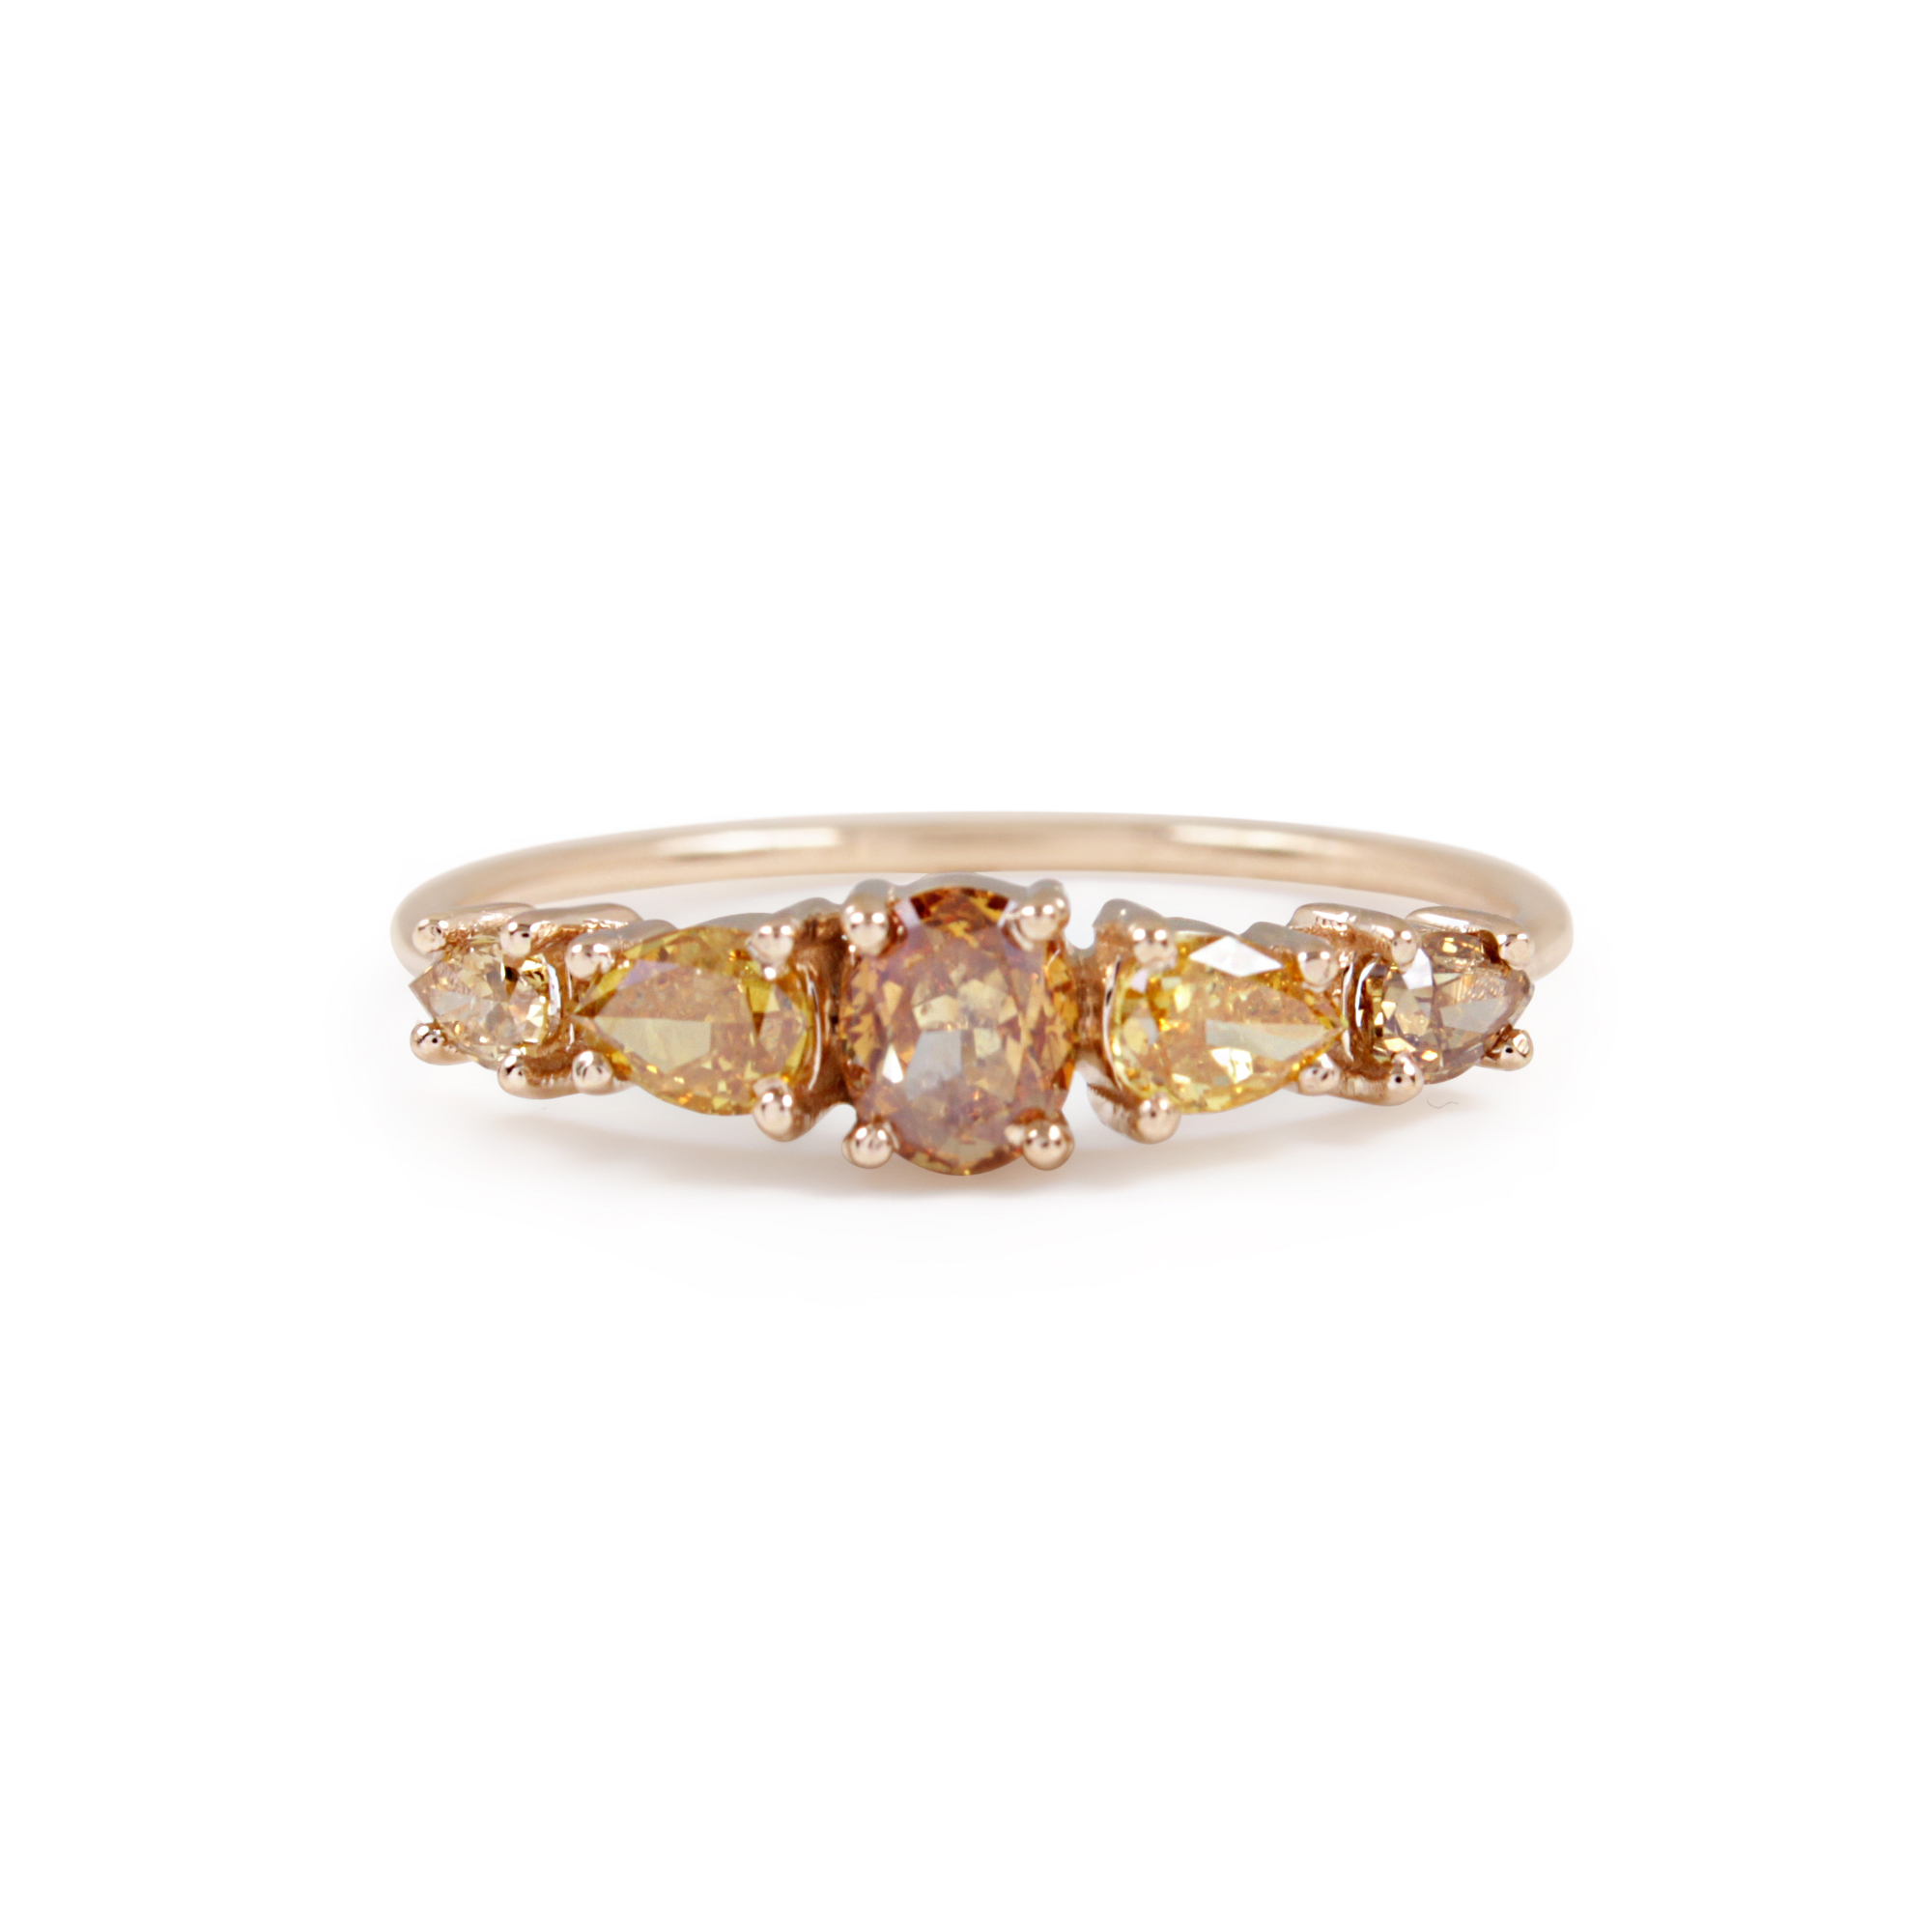 14K Solid Yellow Gold Pave Diamond Ring Fine Jewelry